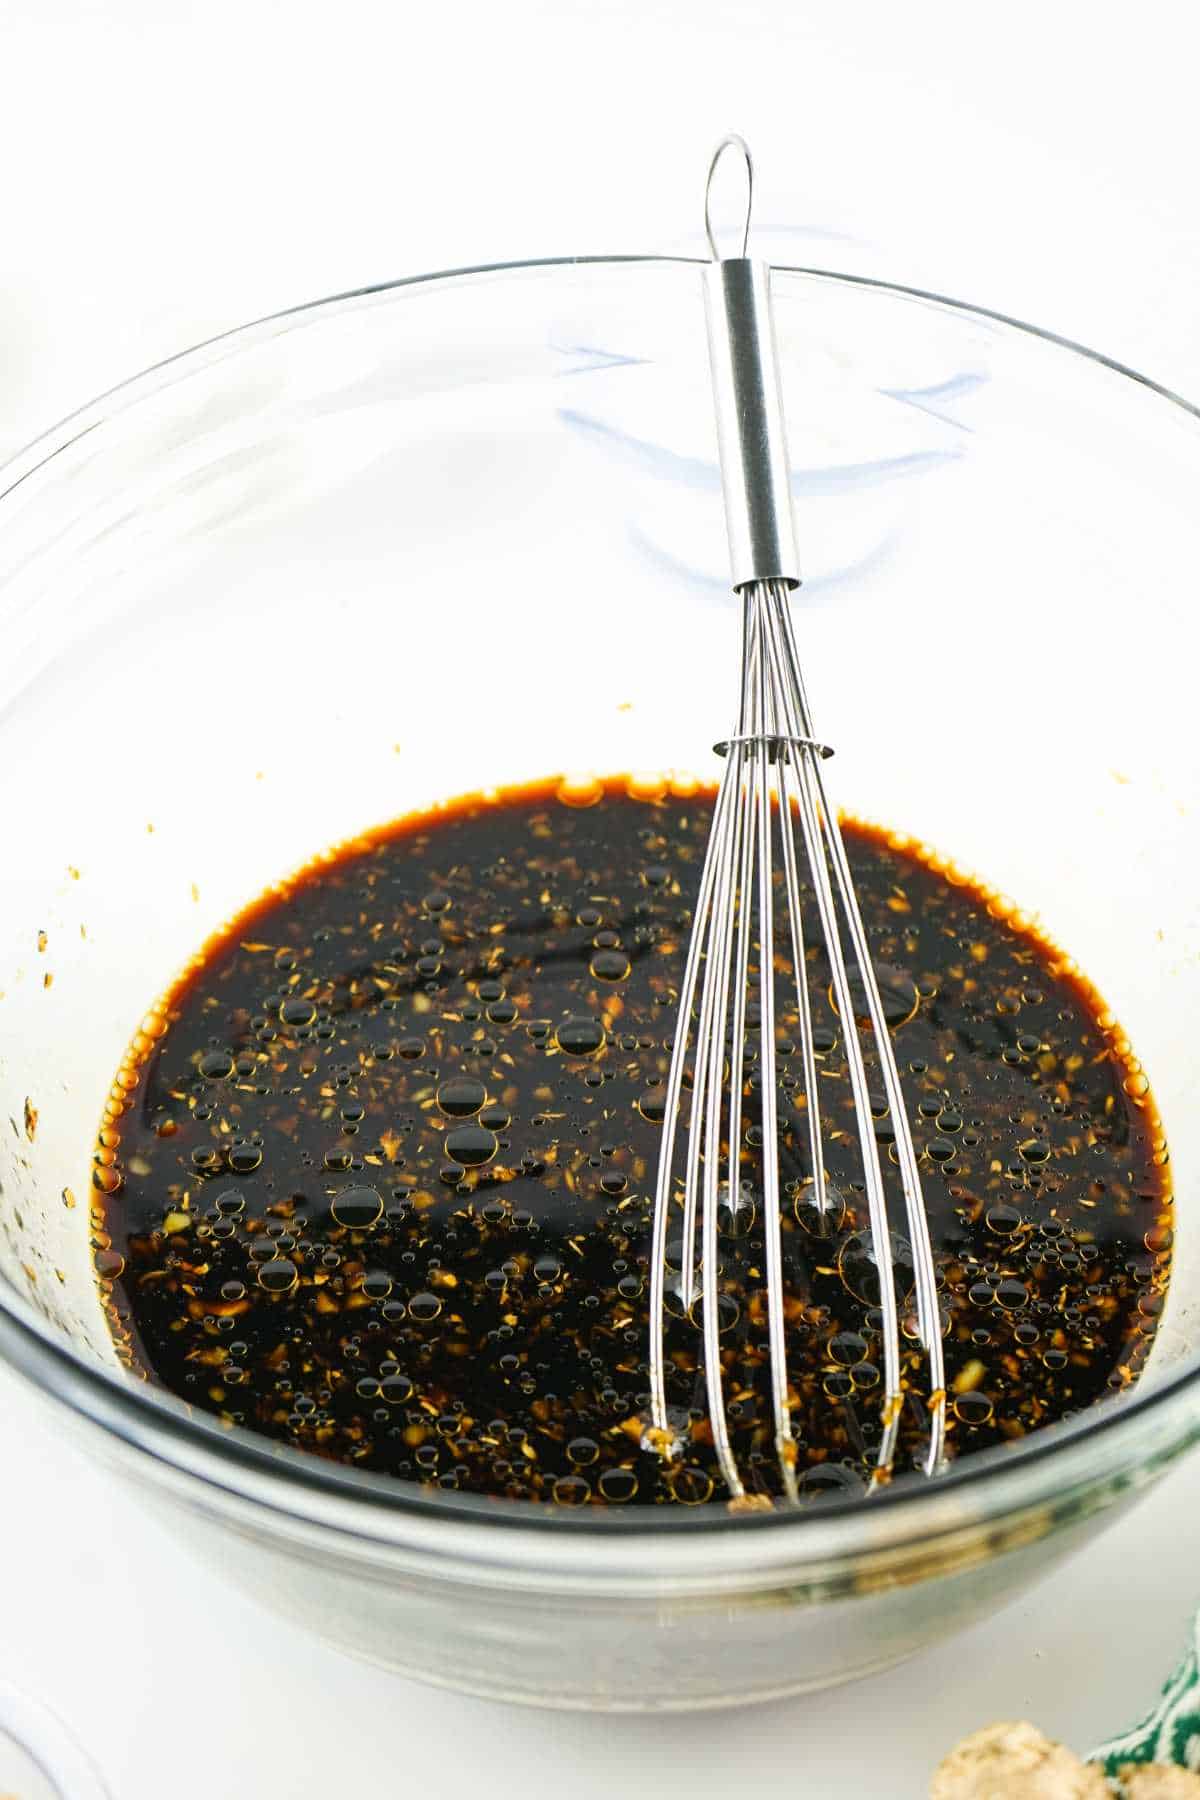 bowl of dark sauce with a whisk.